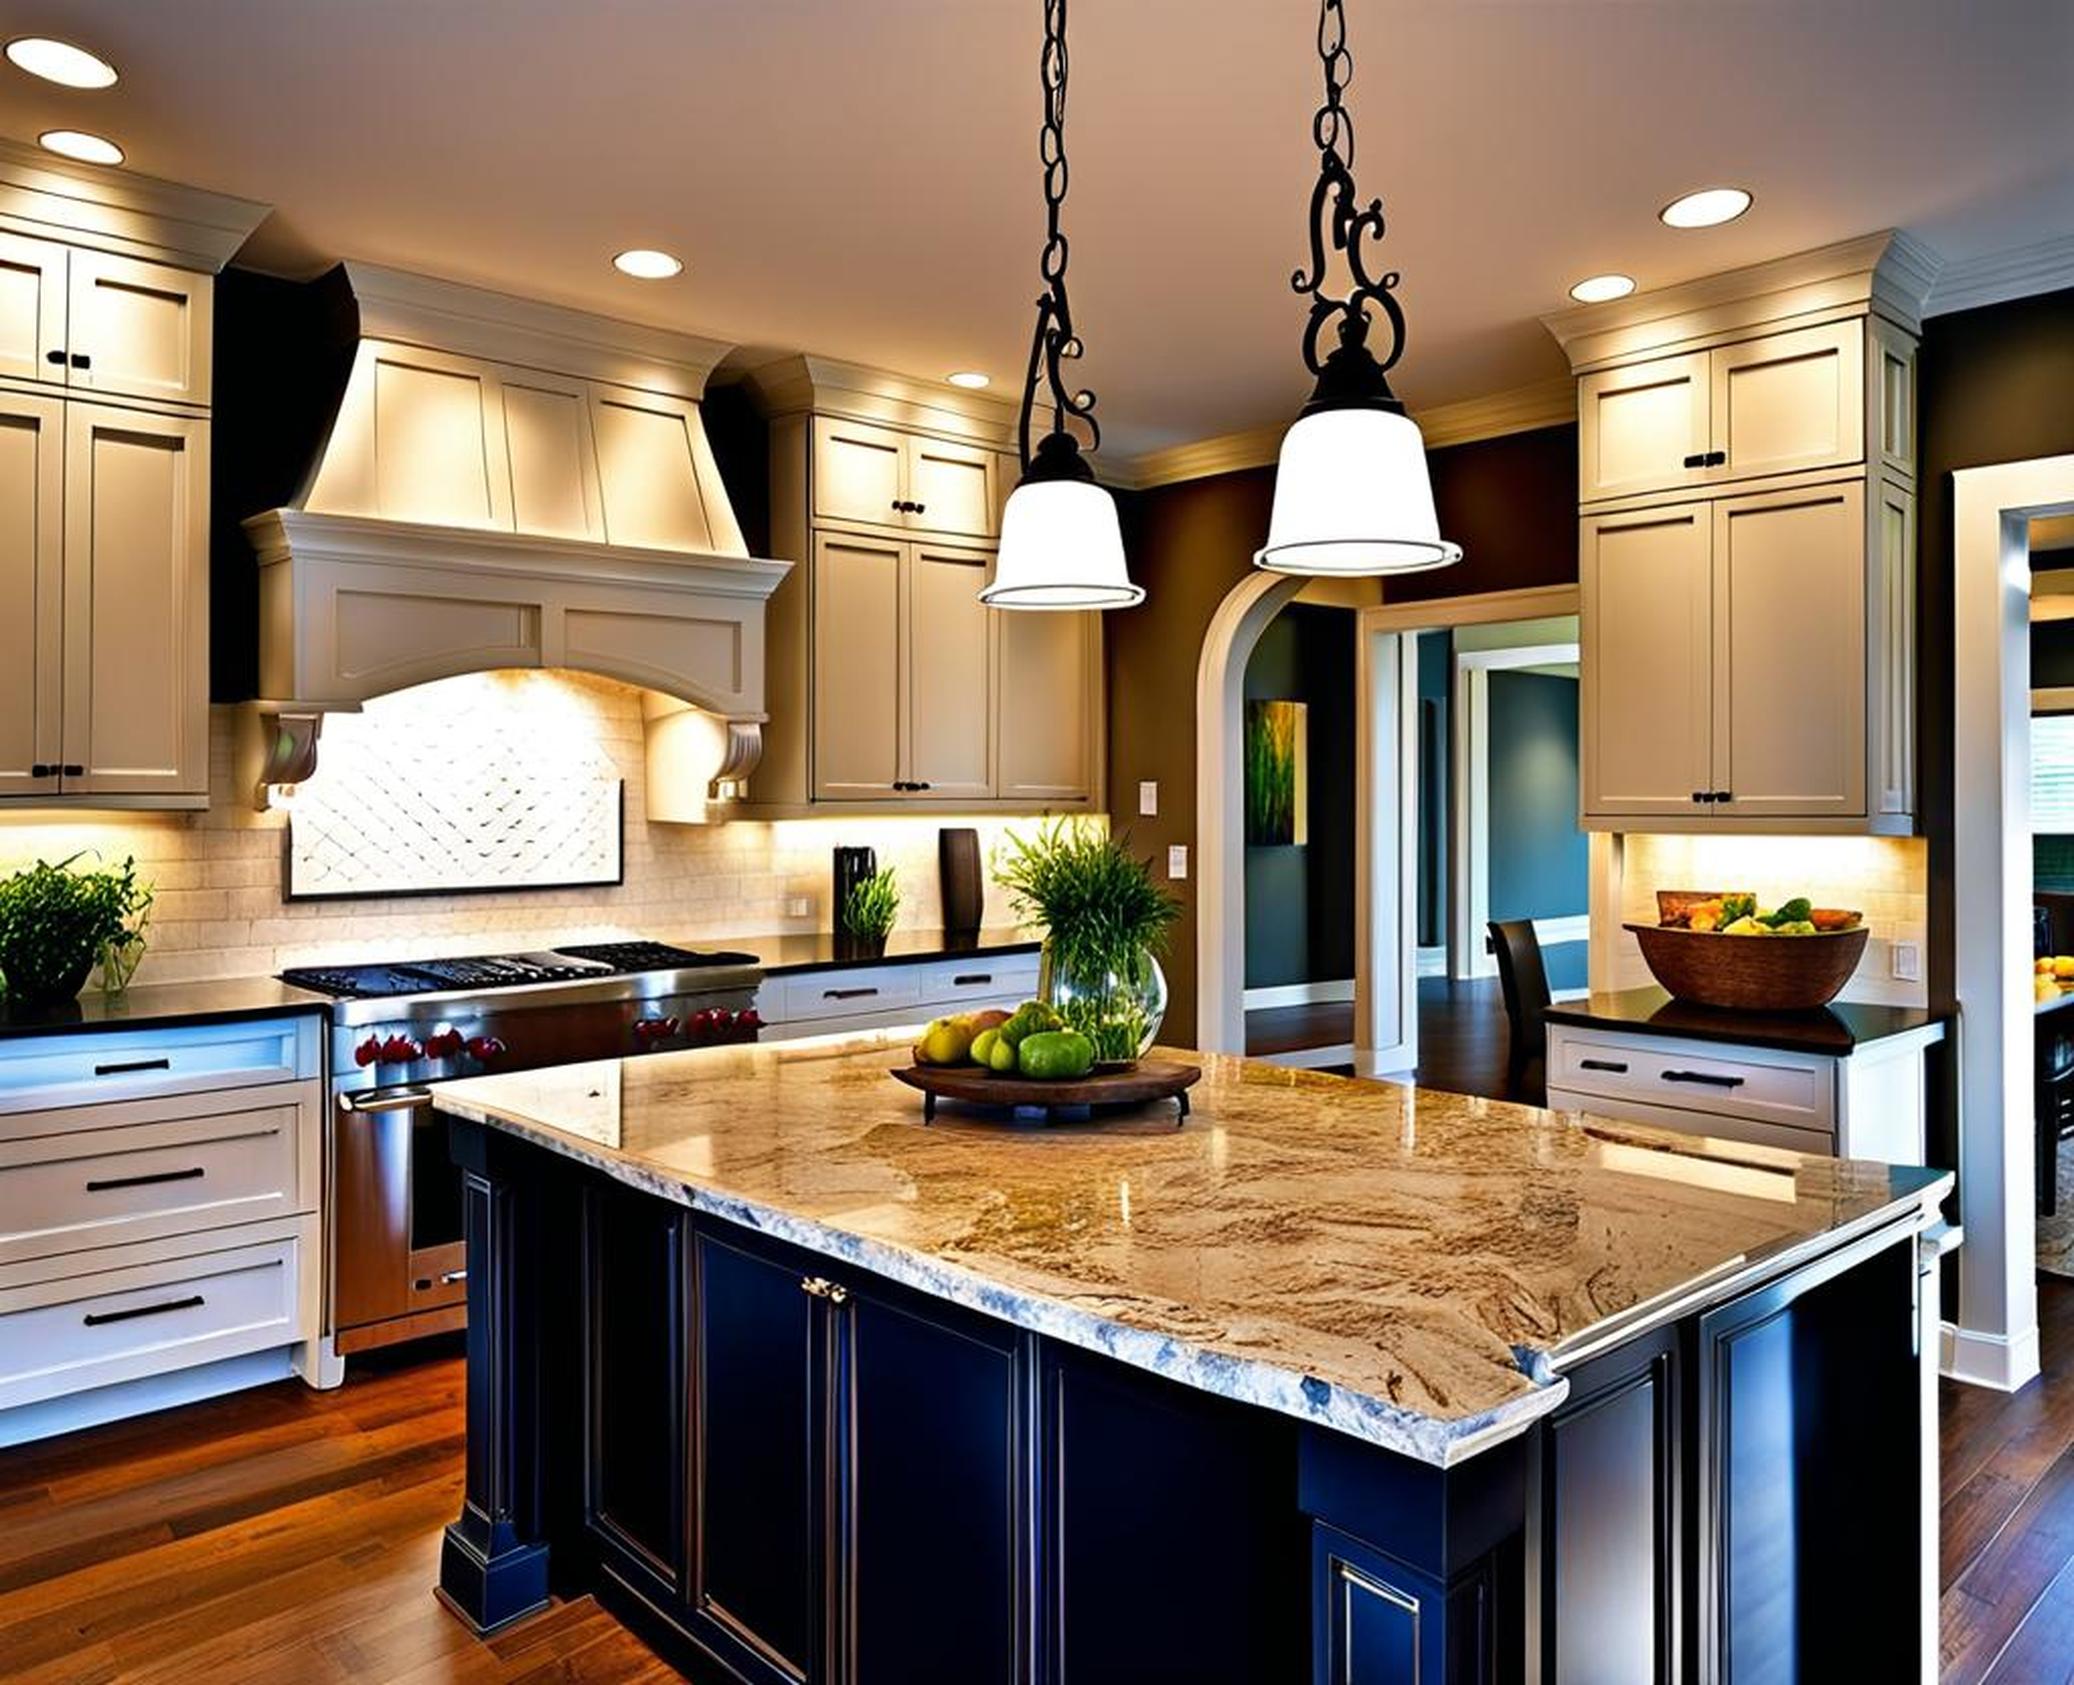 kitchen light fixtures for low ceilings